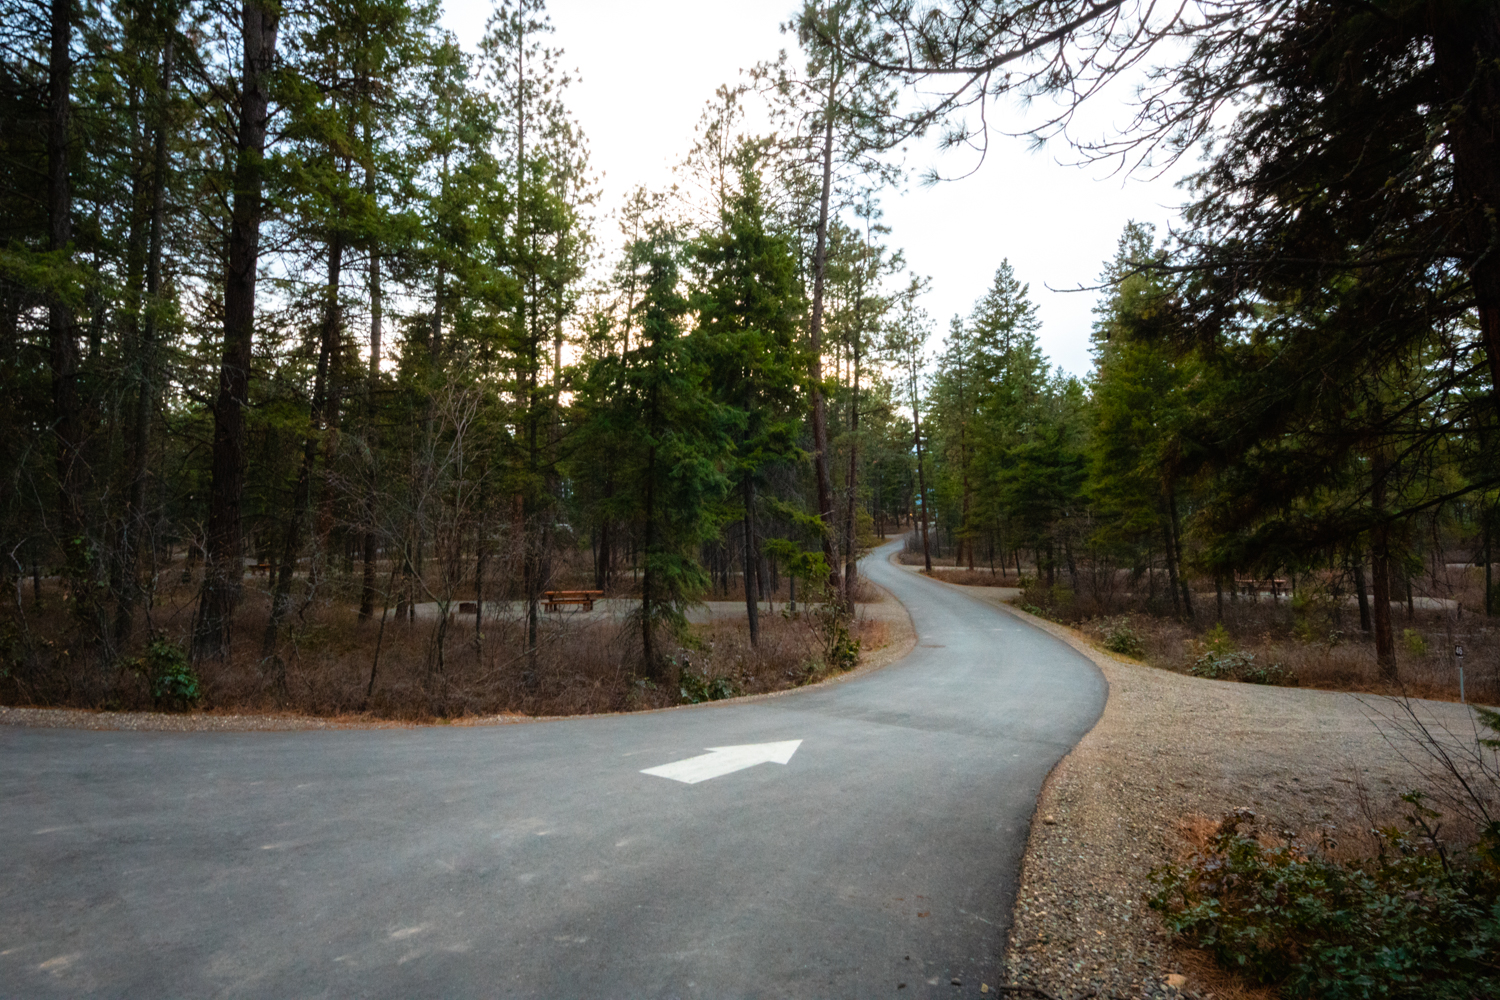 Paved road through the Ellison Provincial Park campground on a dreary day.